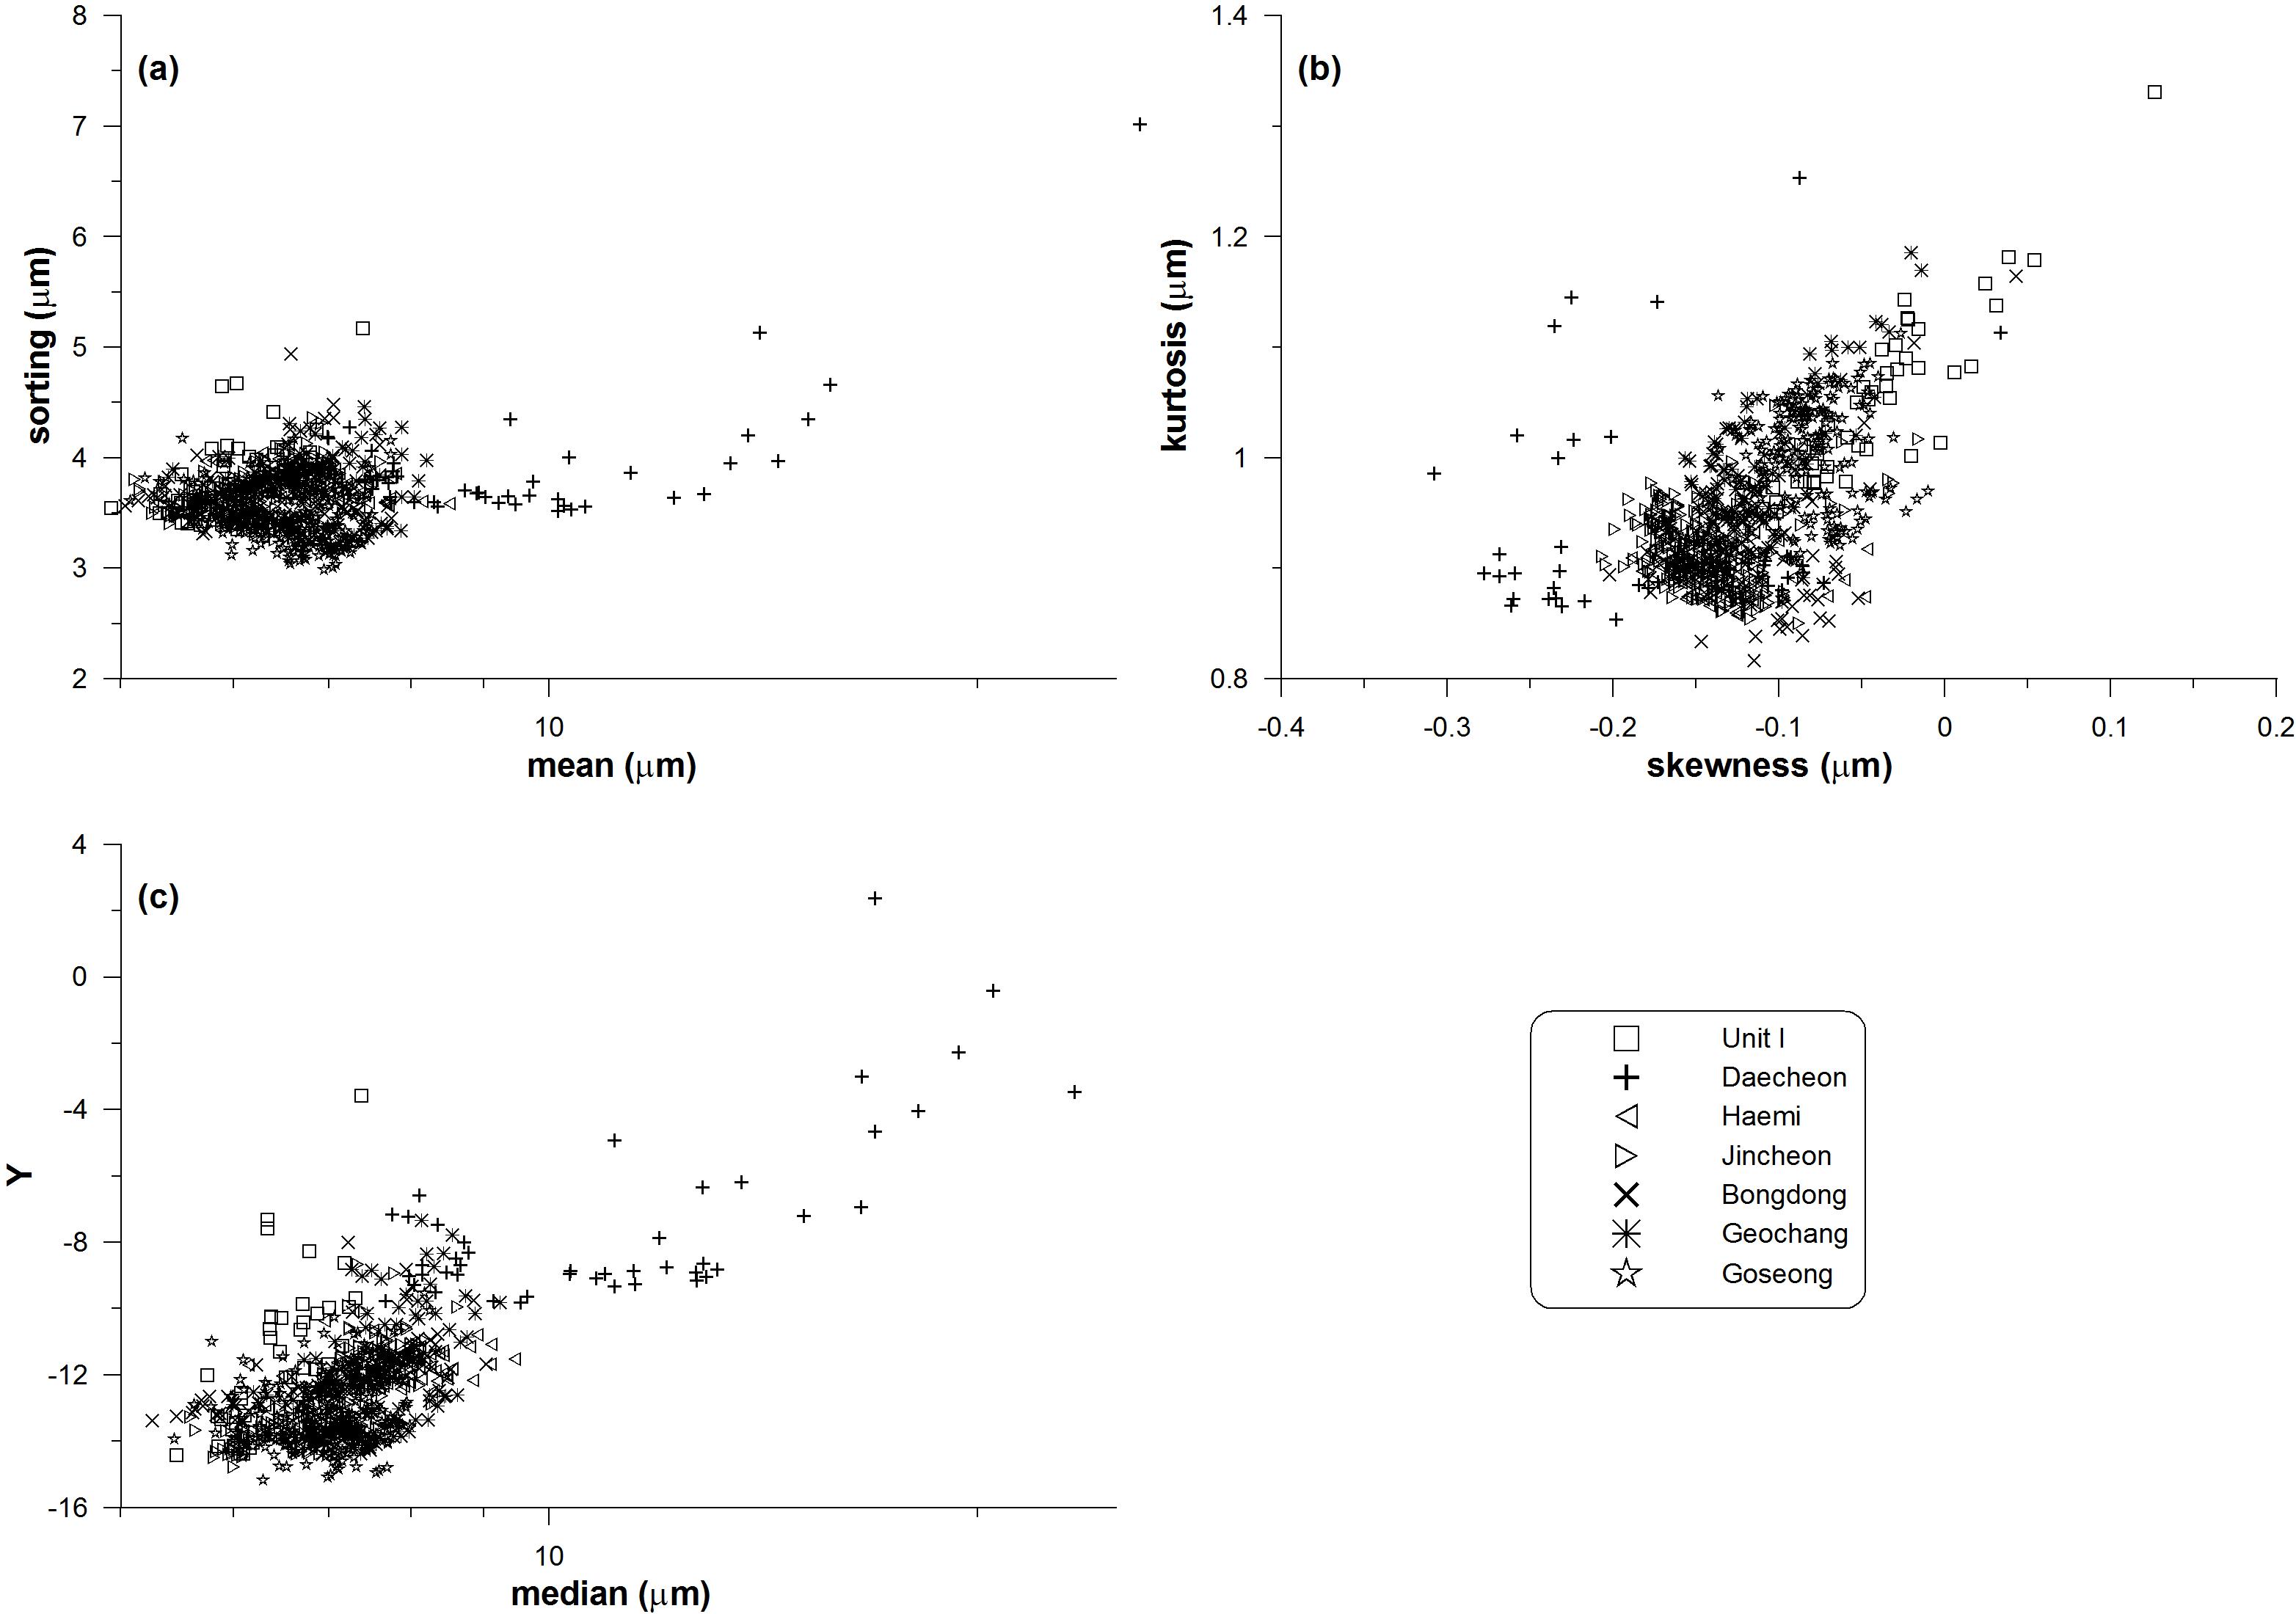 Comparisons of grain size parameters from Unit I in the section studied to the Korean loess